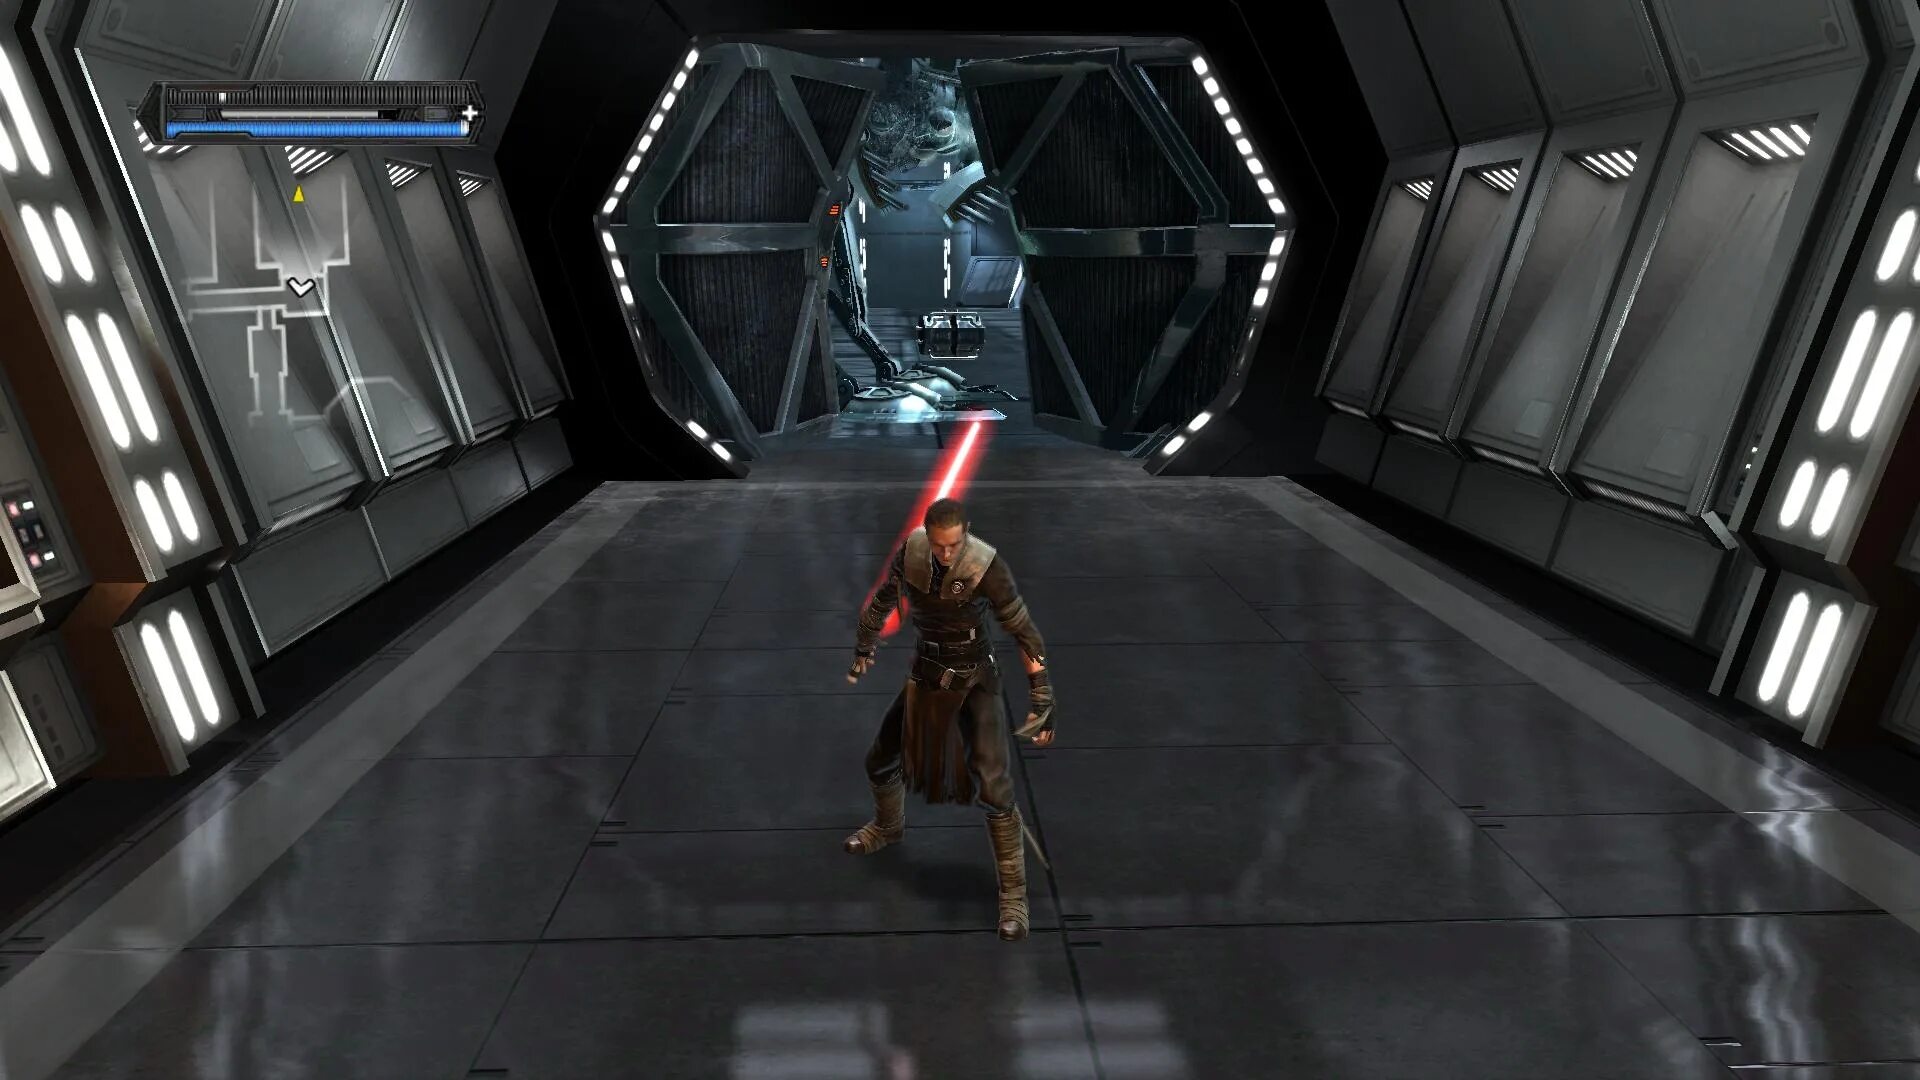 Игры про star wars. The Force unleashed Ultimate Sith Edition. Star Wars игра 2008. Игра Star Wars 1991.